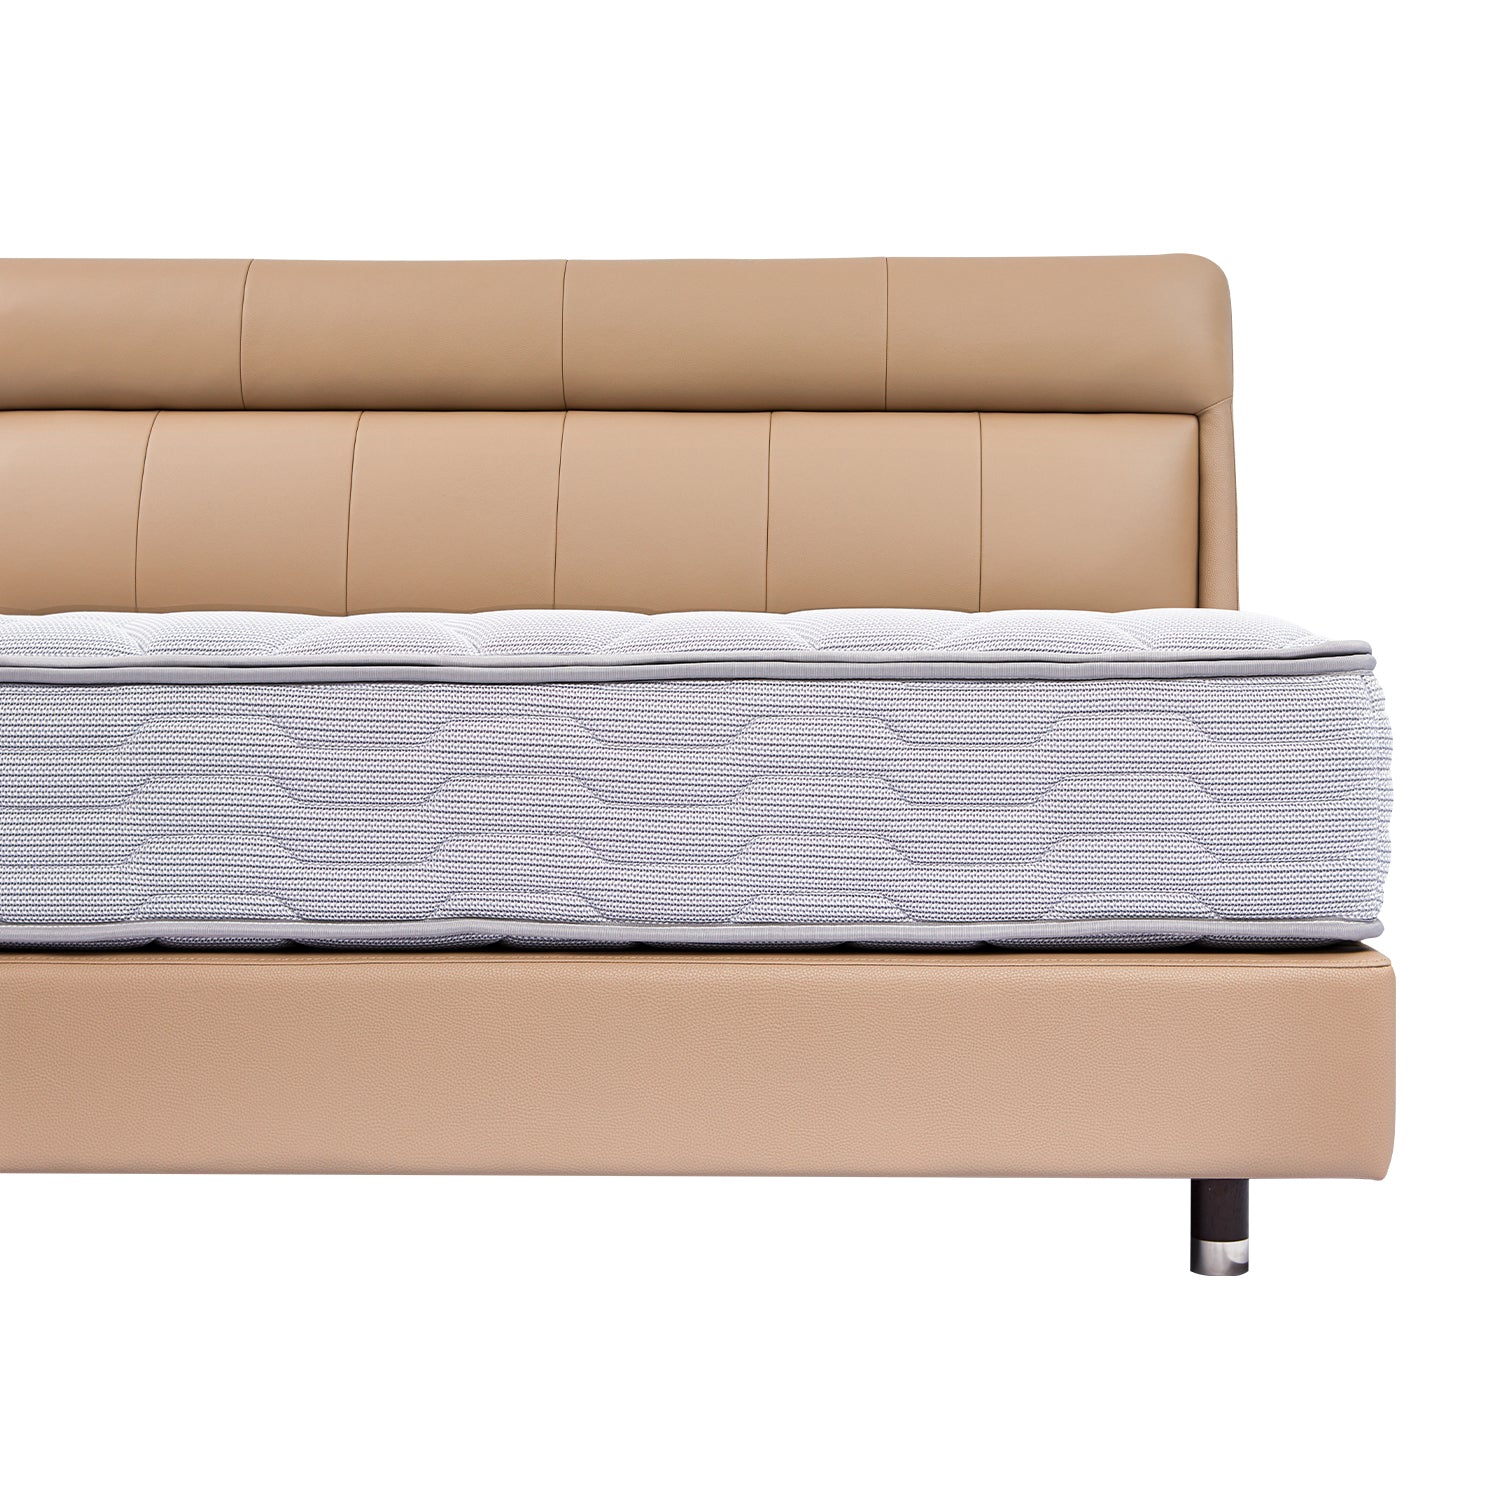 Beige leather bed frame BOC1 - 011 with mattress, featuring sleek and modern design from DeRUCCI